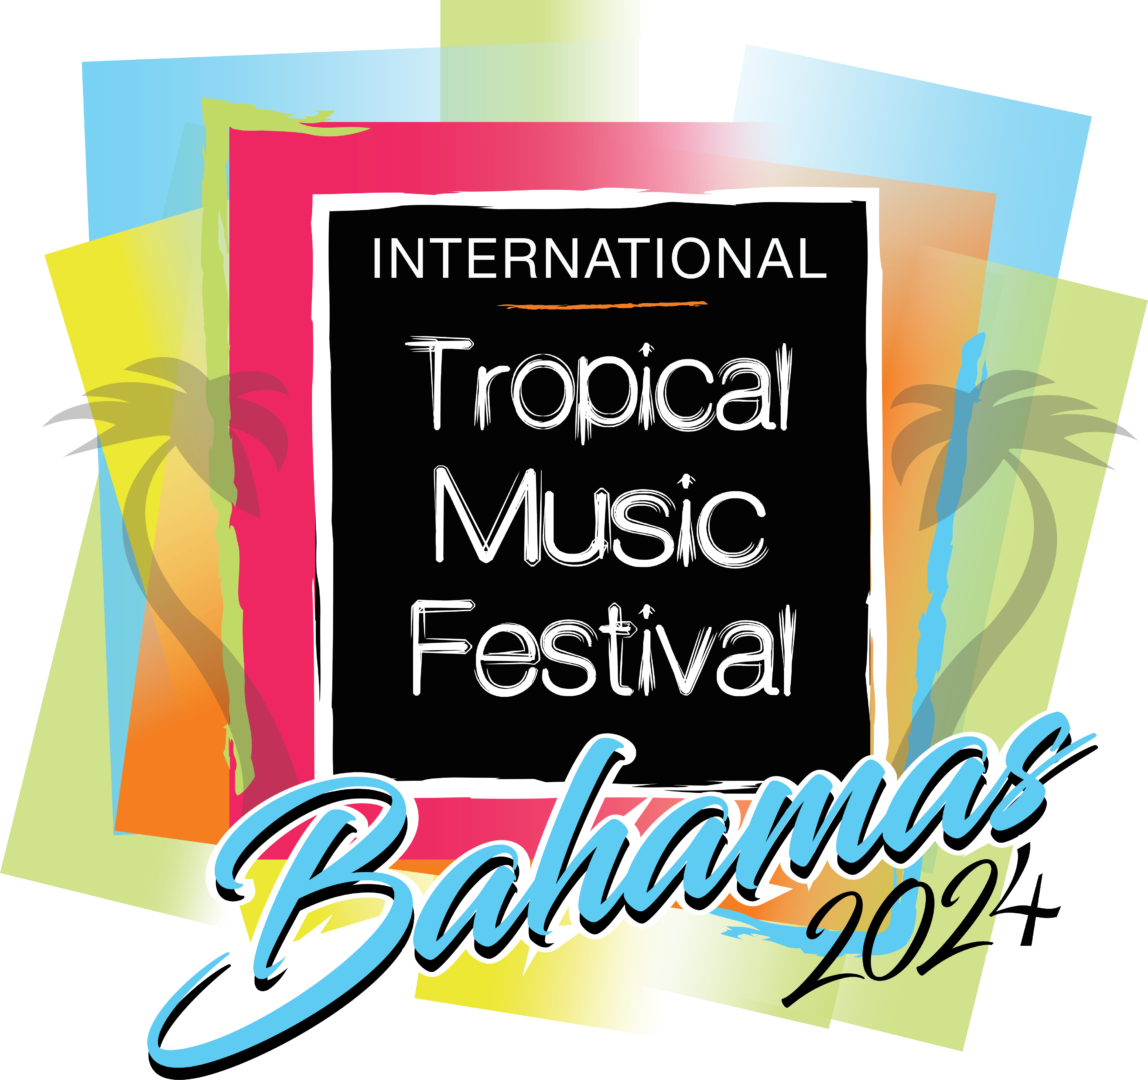 A colorful picture of the bahamas with text that reads " international tropical music festival bahamas 2 0 1 4 ".